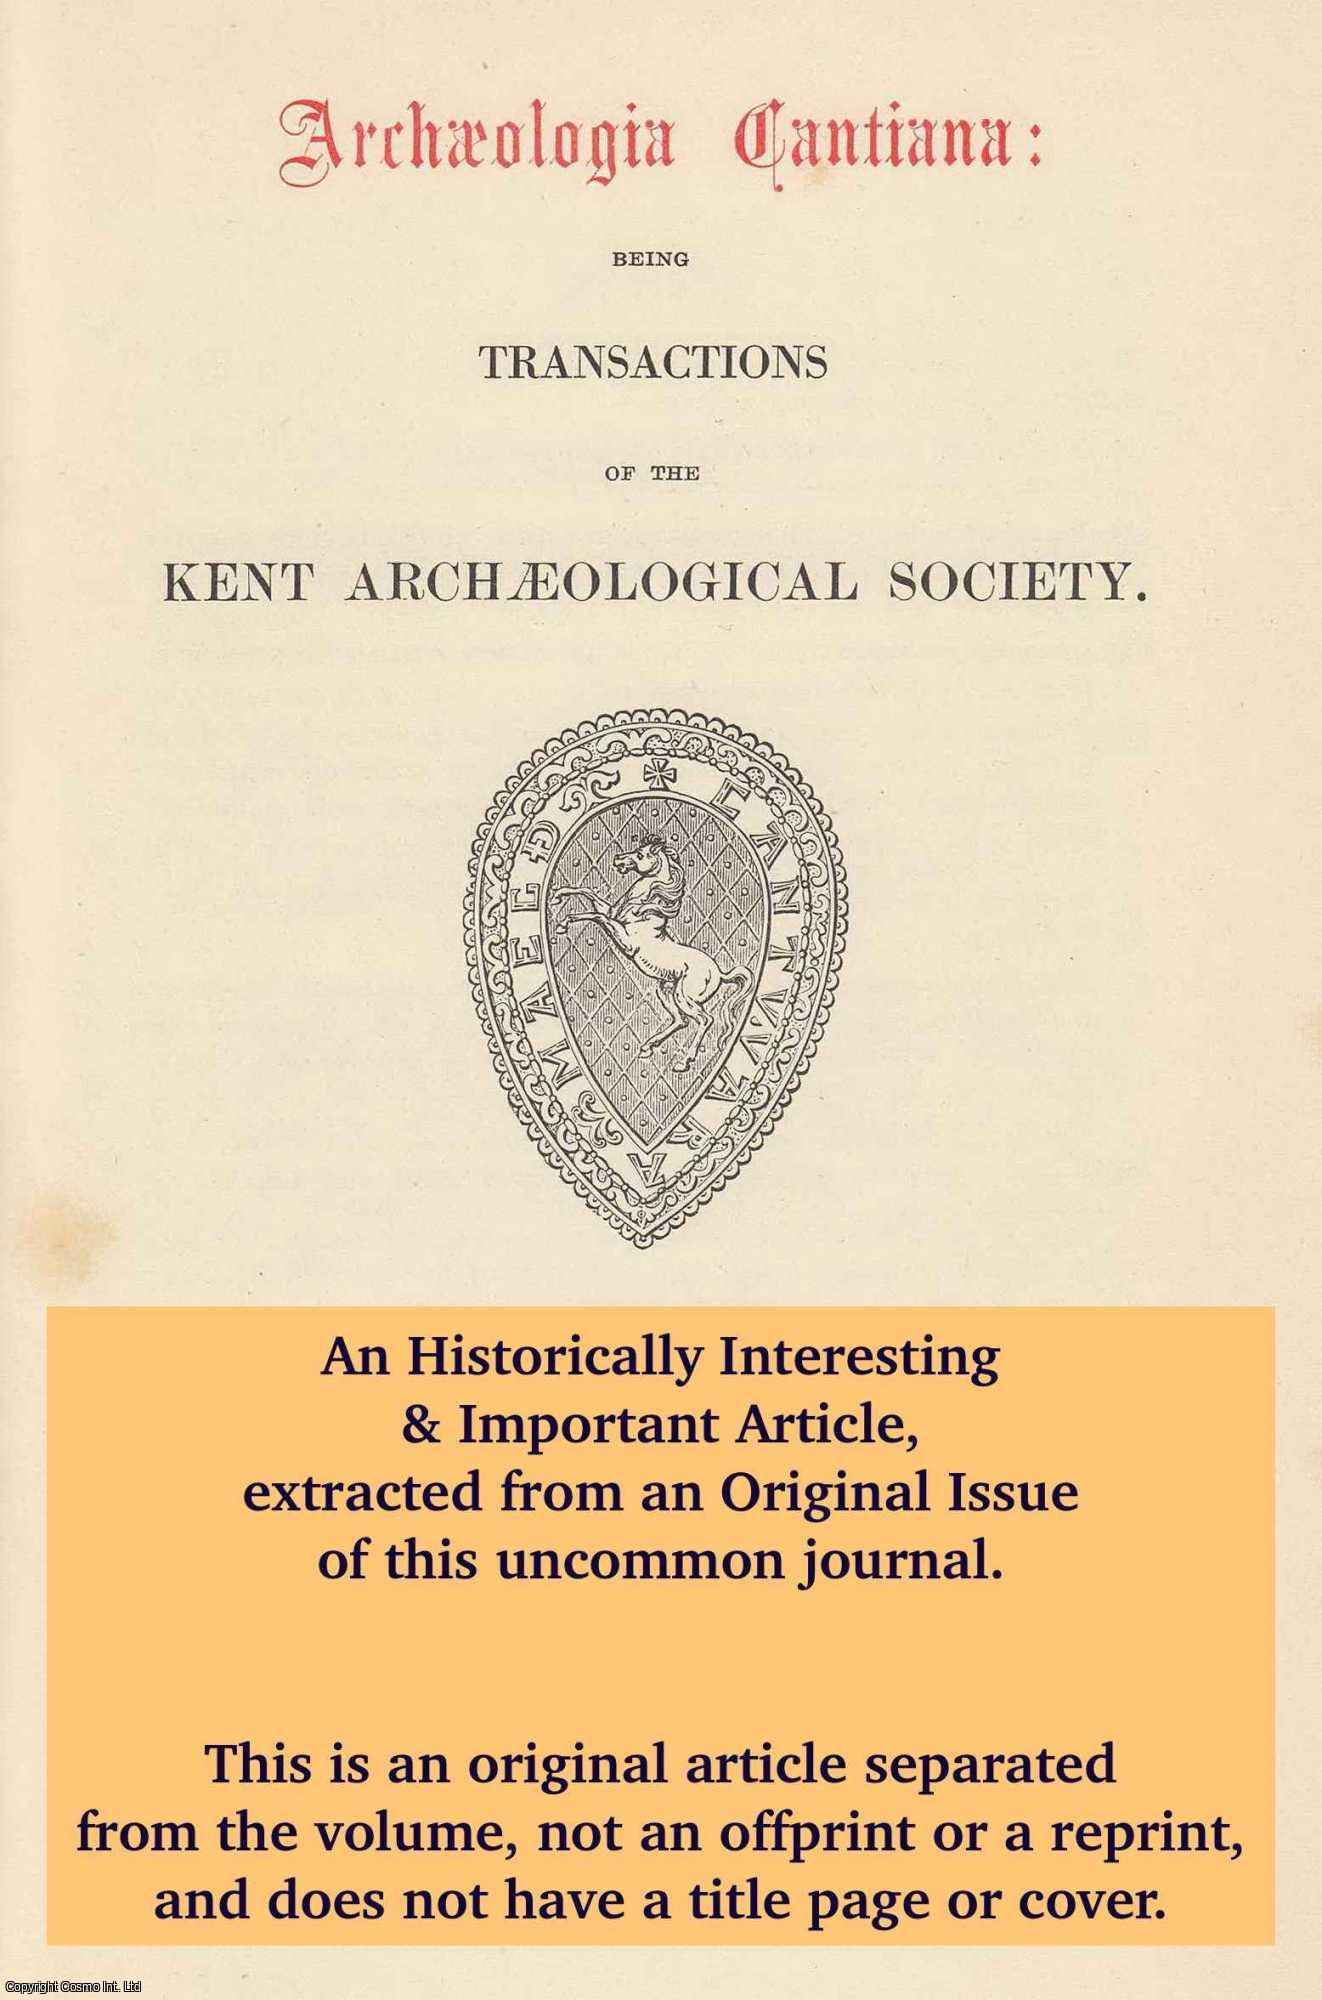 R.J. Spain - The Loose Watermills (Part I). An original article from The Archaeologia Cantiana: Transactions of The Kent Archaeological Society, 1973.